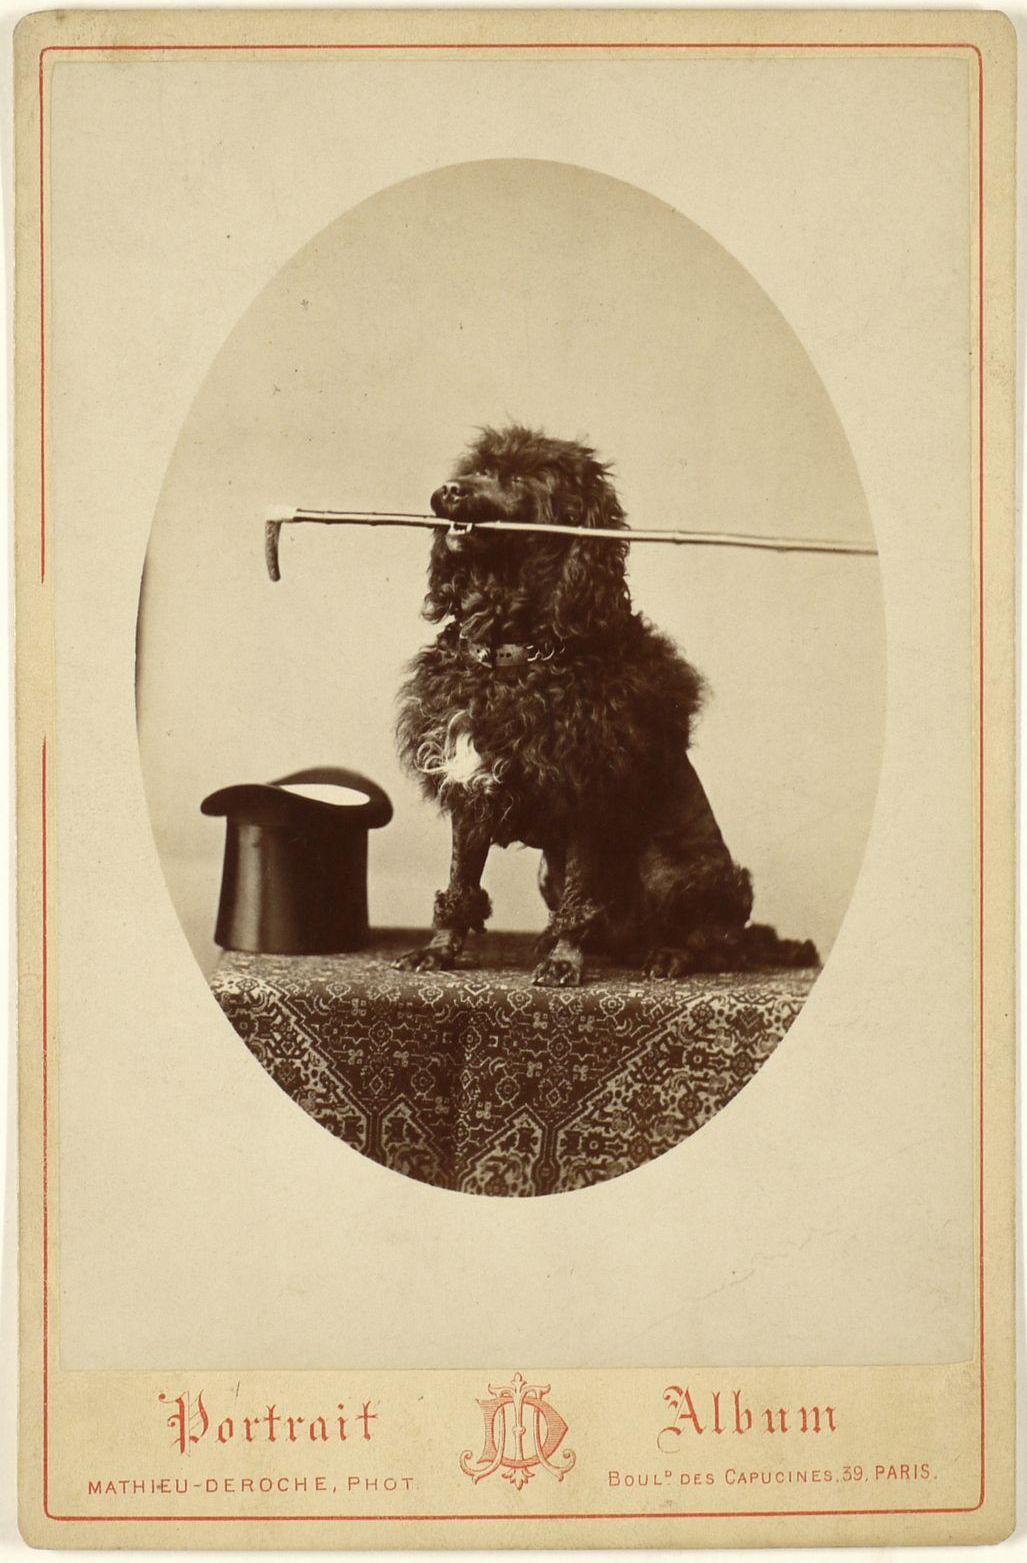 Click for larger image: Mathieu Deroche (French, 1837-1918) circa 1885 photograph of the Prince of Walesâ€™ Poodle  - Mathieu Deroche (French, 1837-1918) circa 1885 photograph of the Prince of Walesâ€™ Poodle 